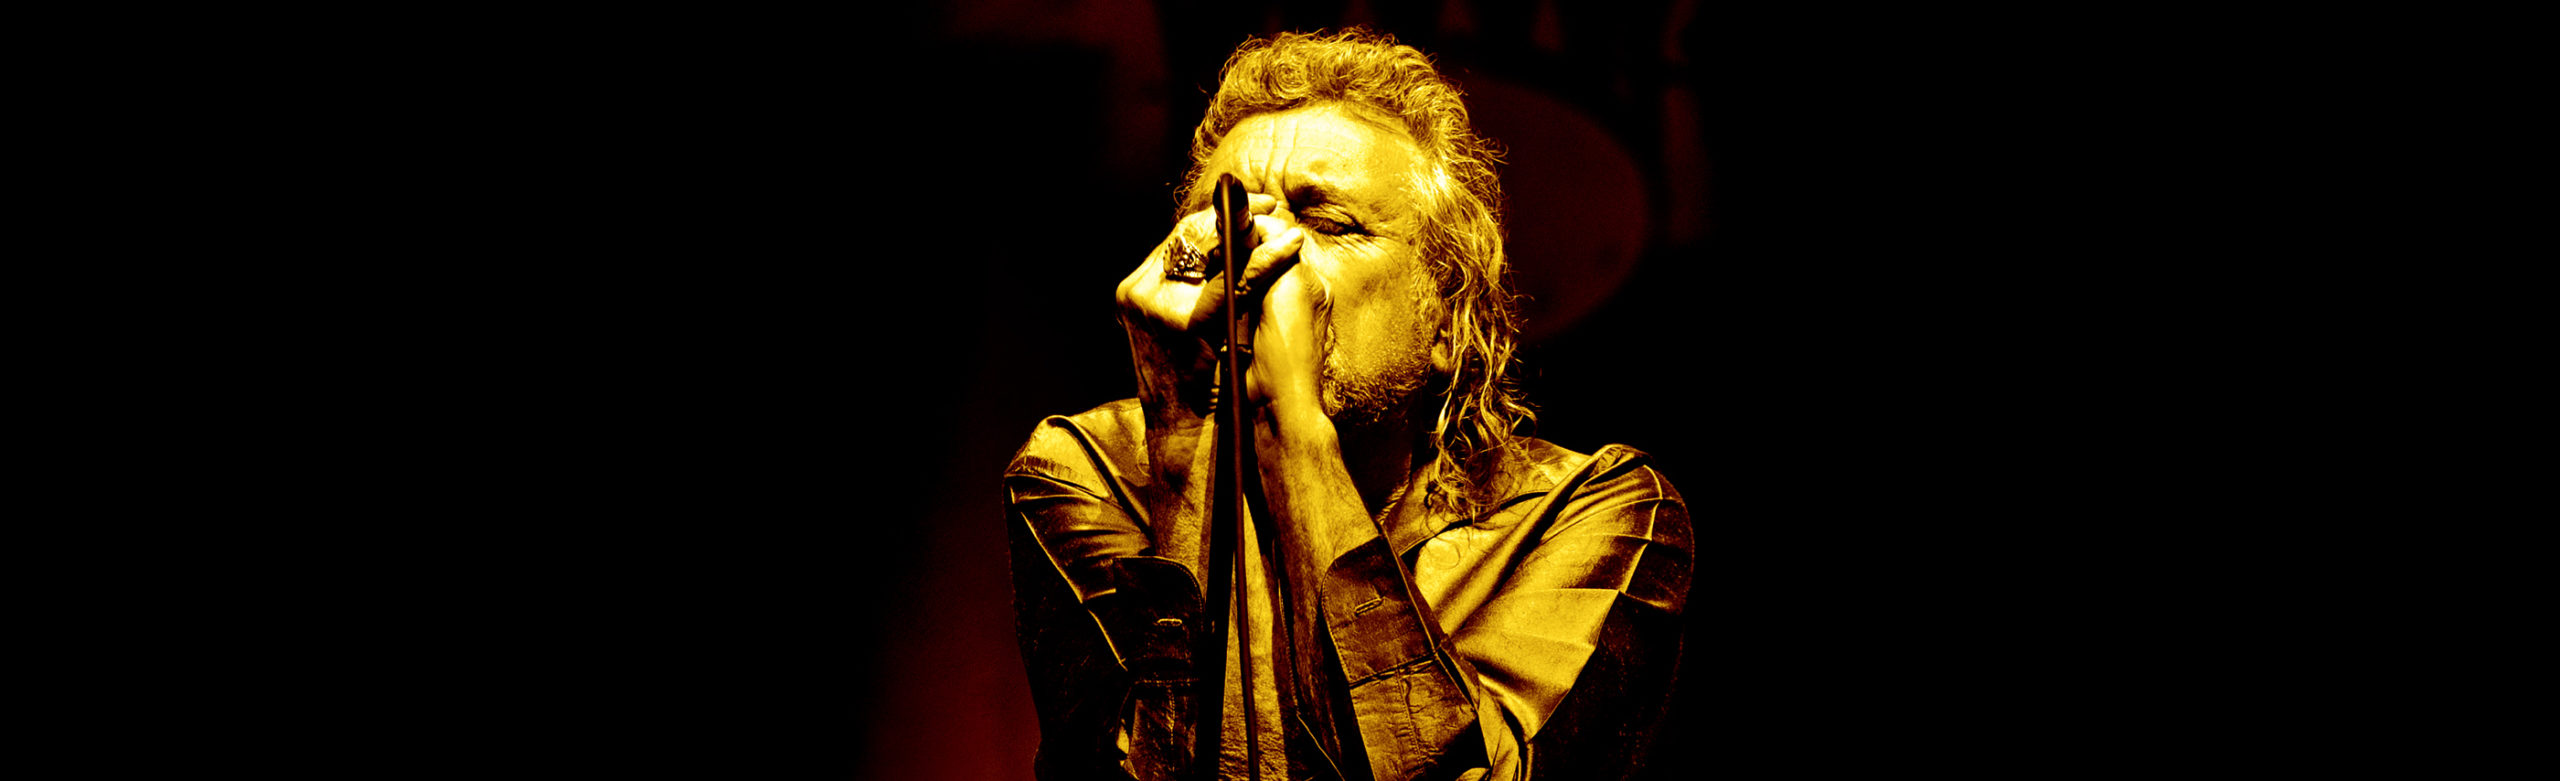 Robert Plant and The Sensational Space Shifters